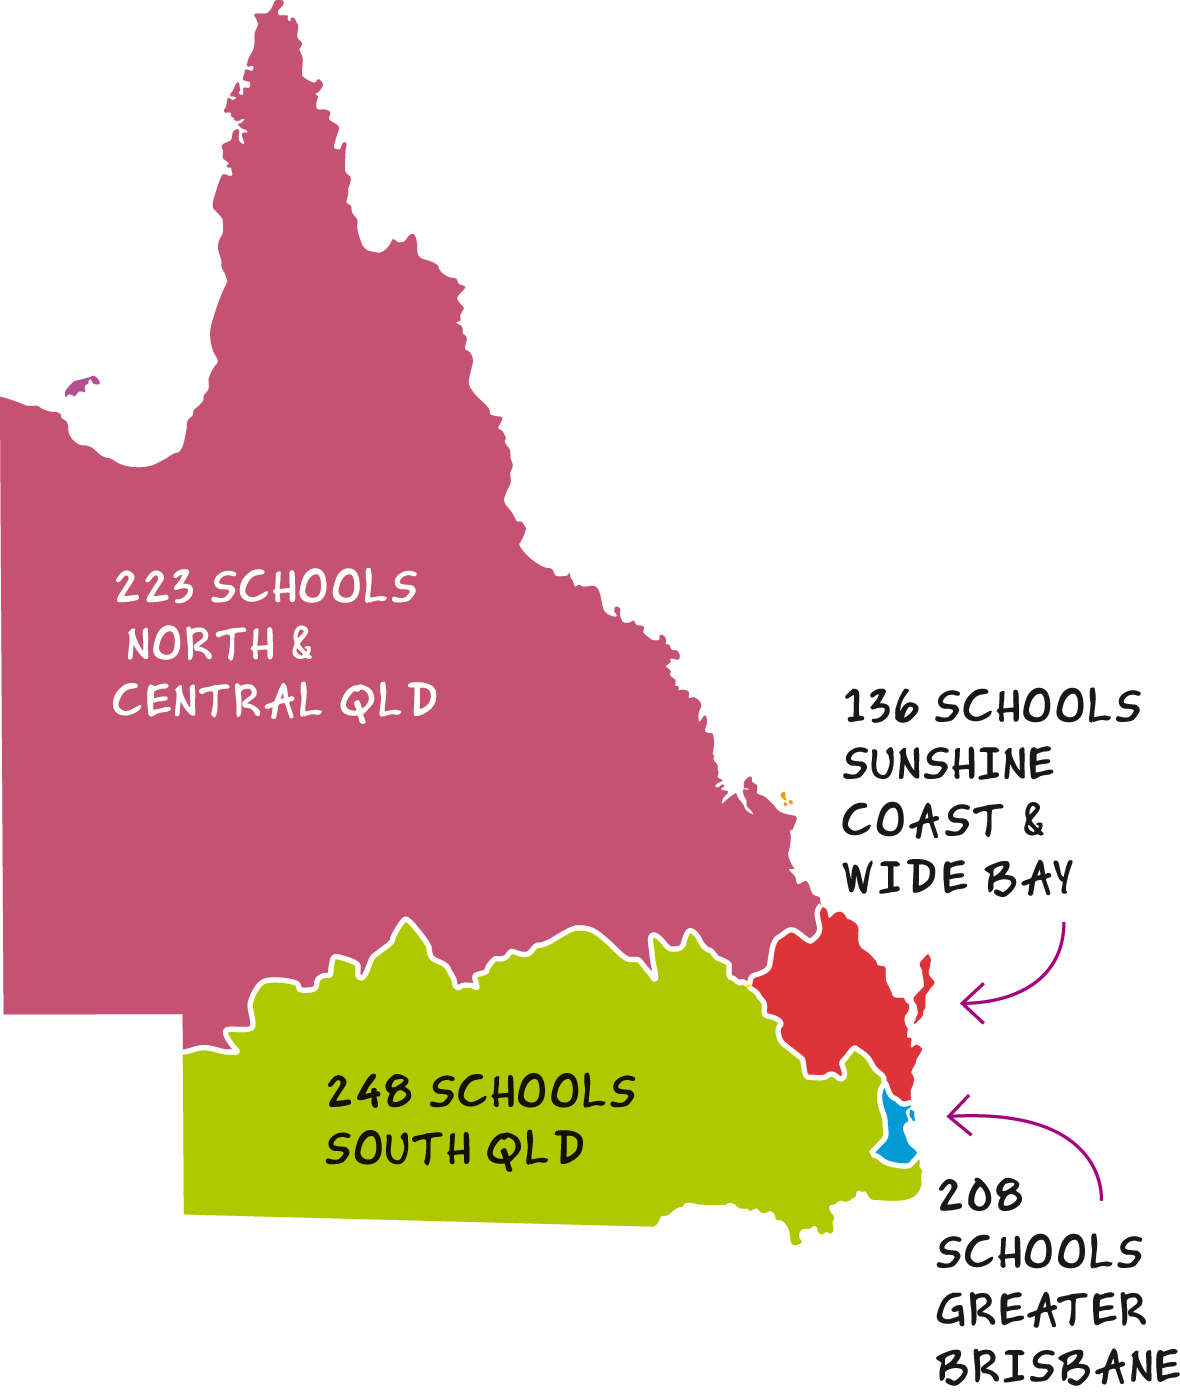 In Queensland we had Chappies in: 116 North QLD Schools, 126 in Central QLD Schools, 142 South QLD Schools, 131 in Sunshine Coast and Wide Bay Schools, 145 in Logan and Gold Coast Schools and 213 in Greater Brisbane Schools.